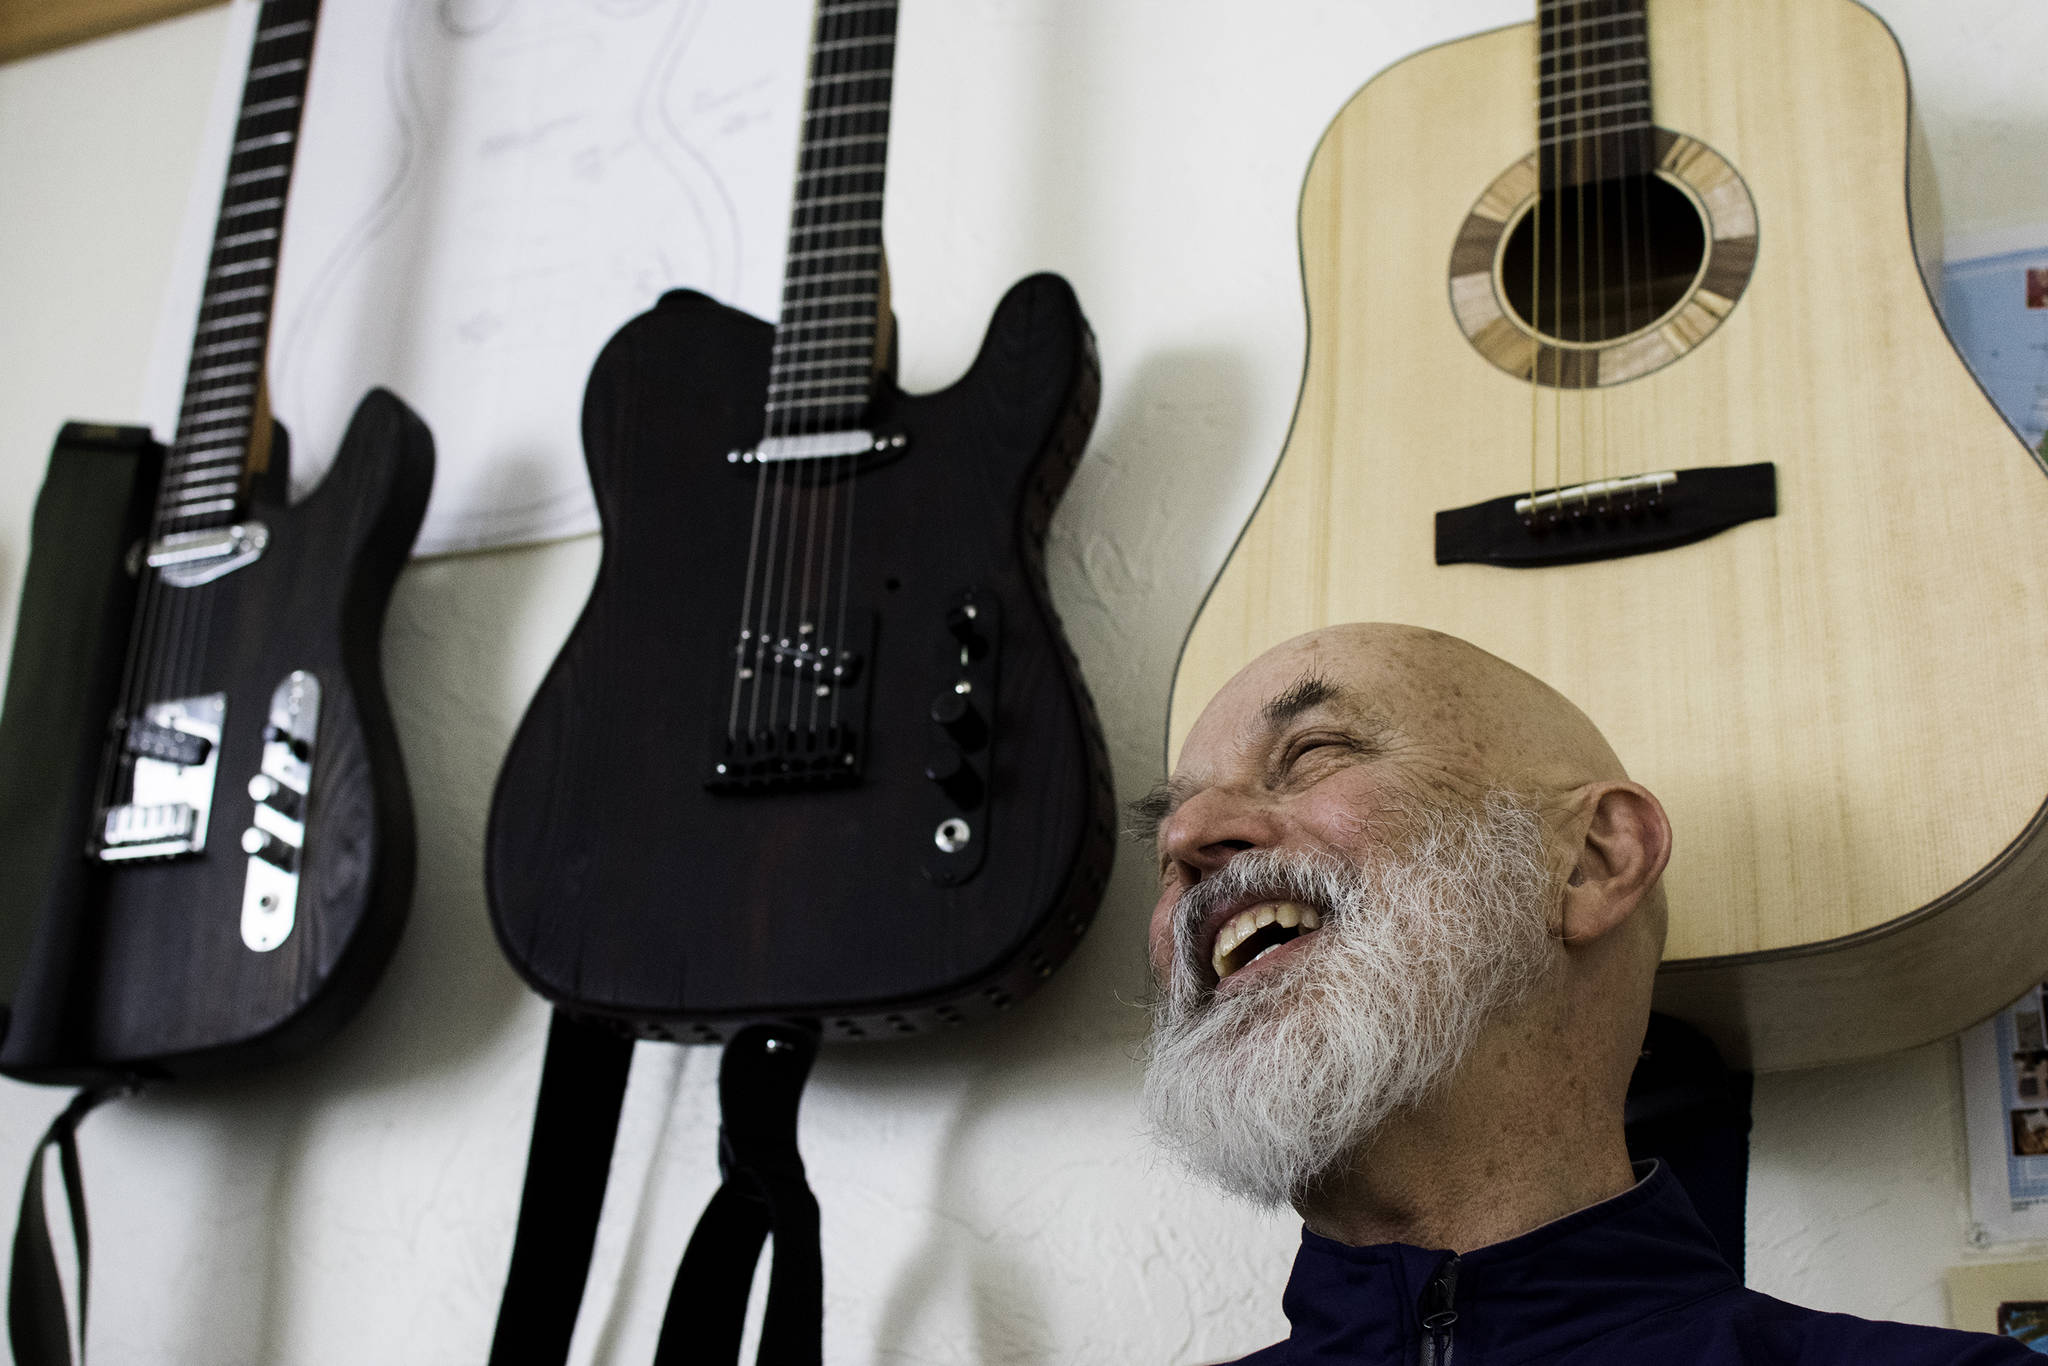 Guitar maker George Gress shares a laugh with a reporter at his home in Juneau on Tuesday, March 27, 2018 while discussing the differences between making acoustic versus electric guitars. Richard McGrail | For the Capital City Weekly